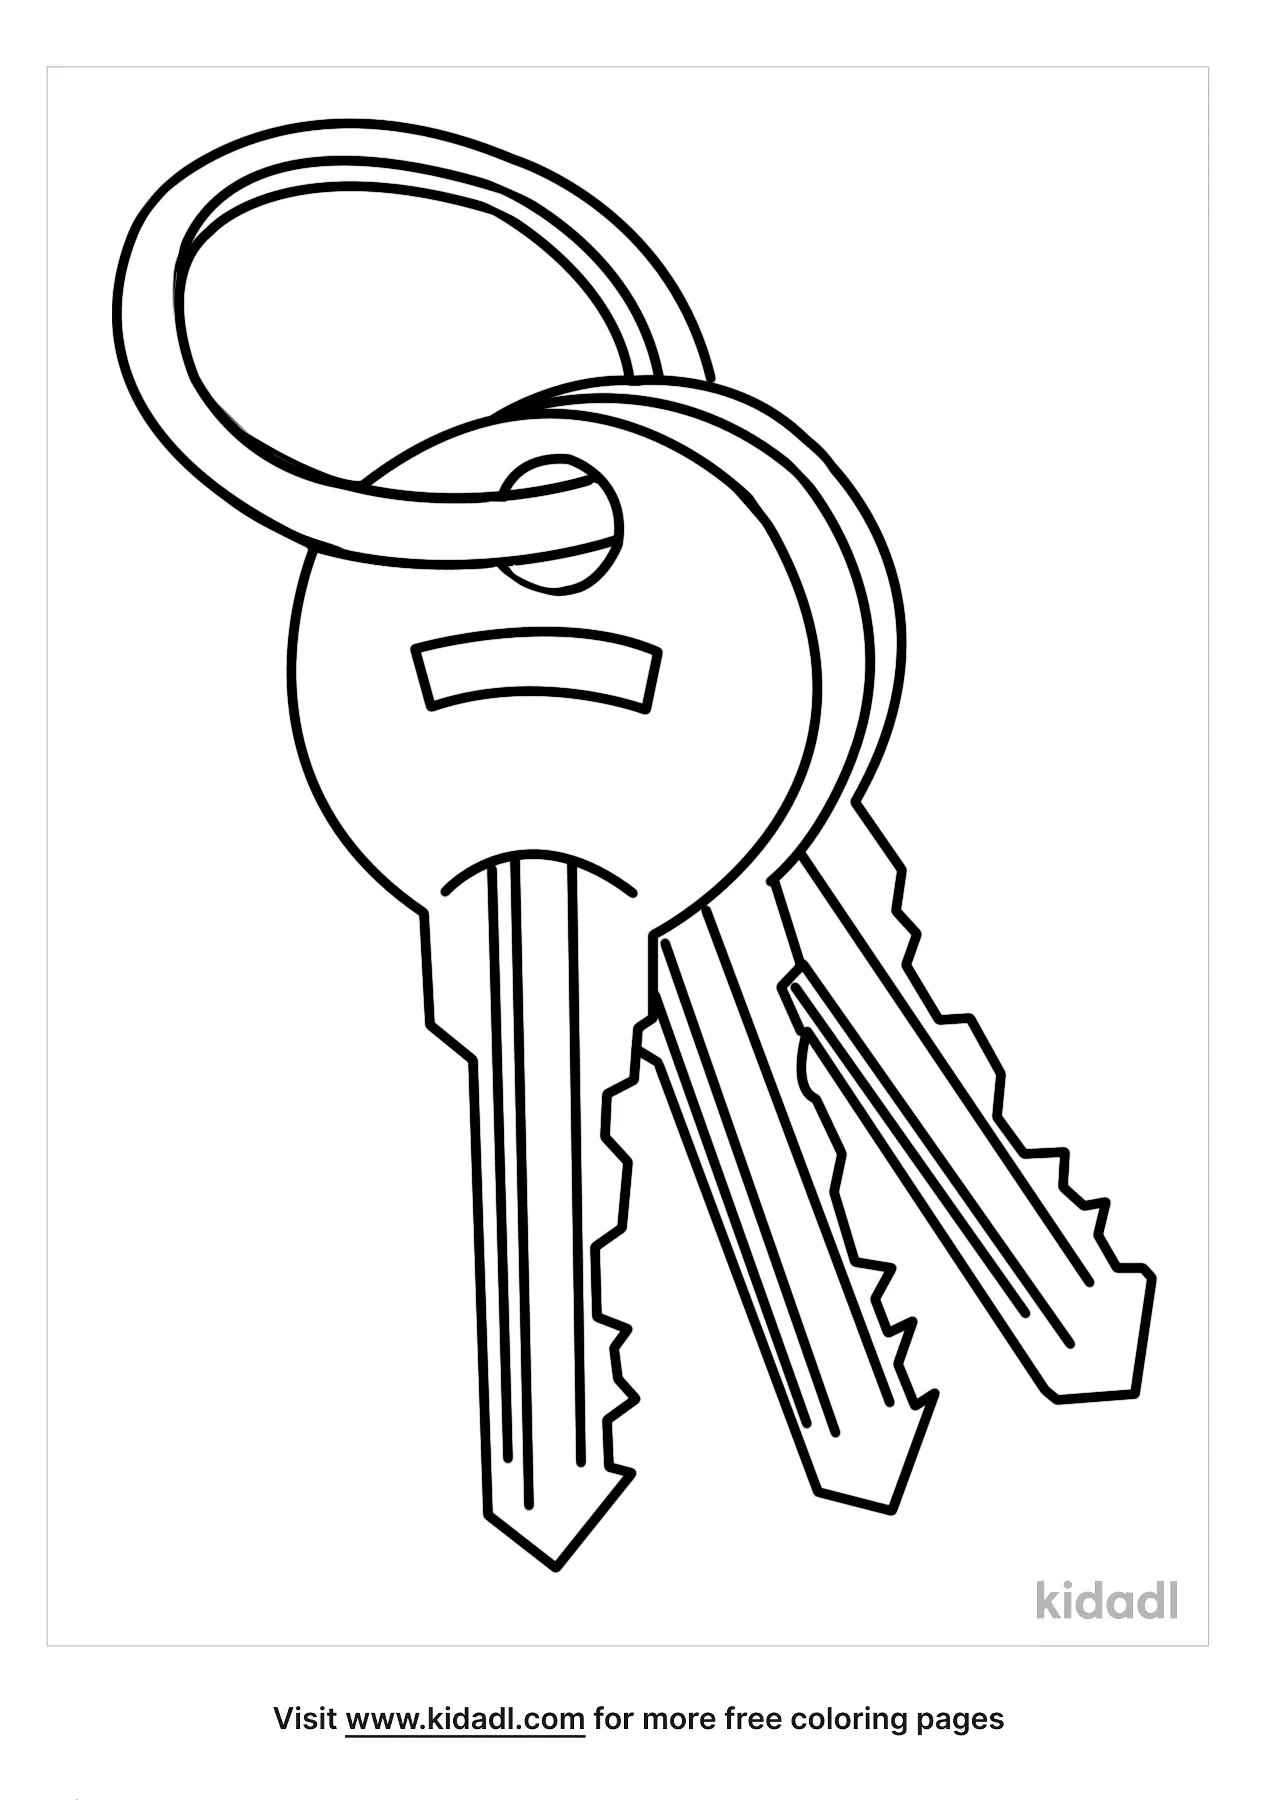 Free key coloring page coloring page printables